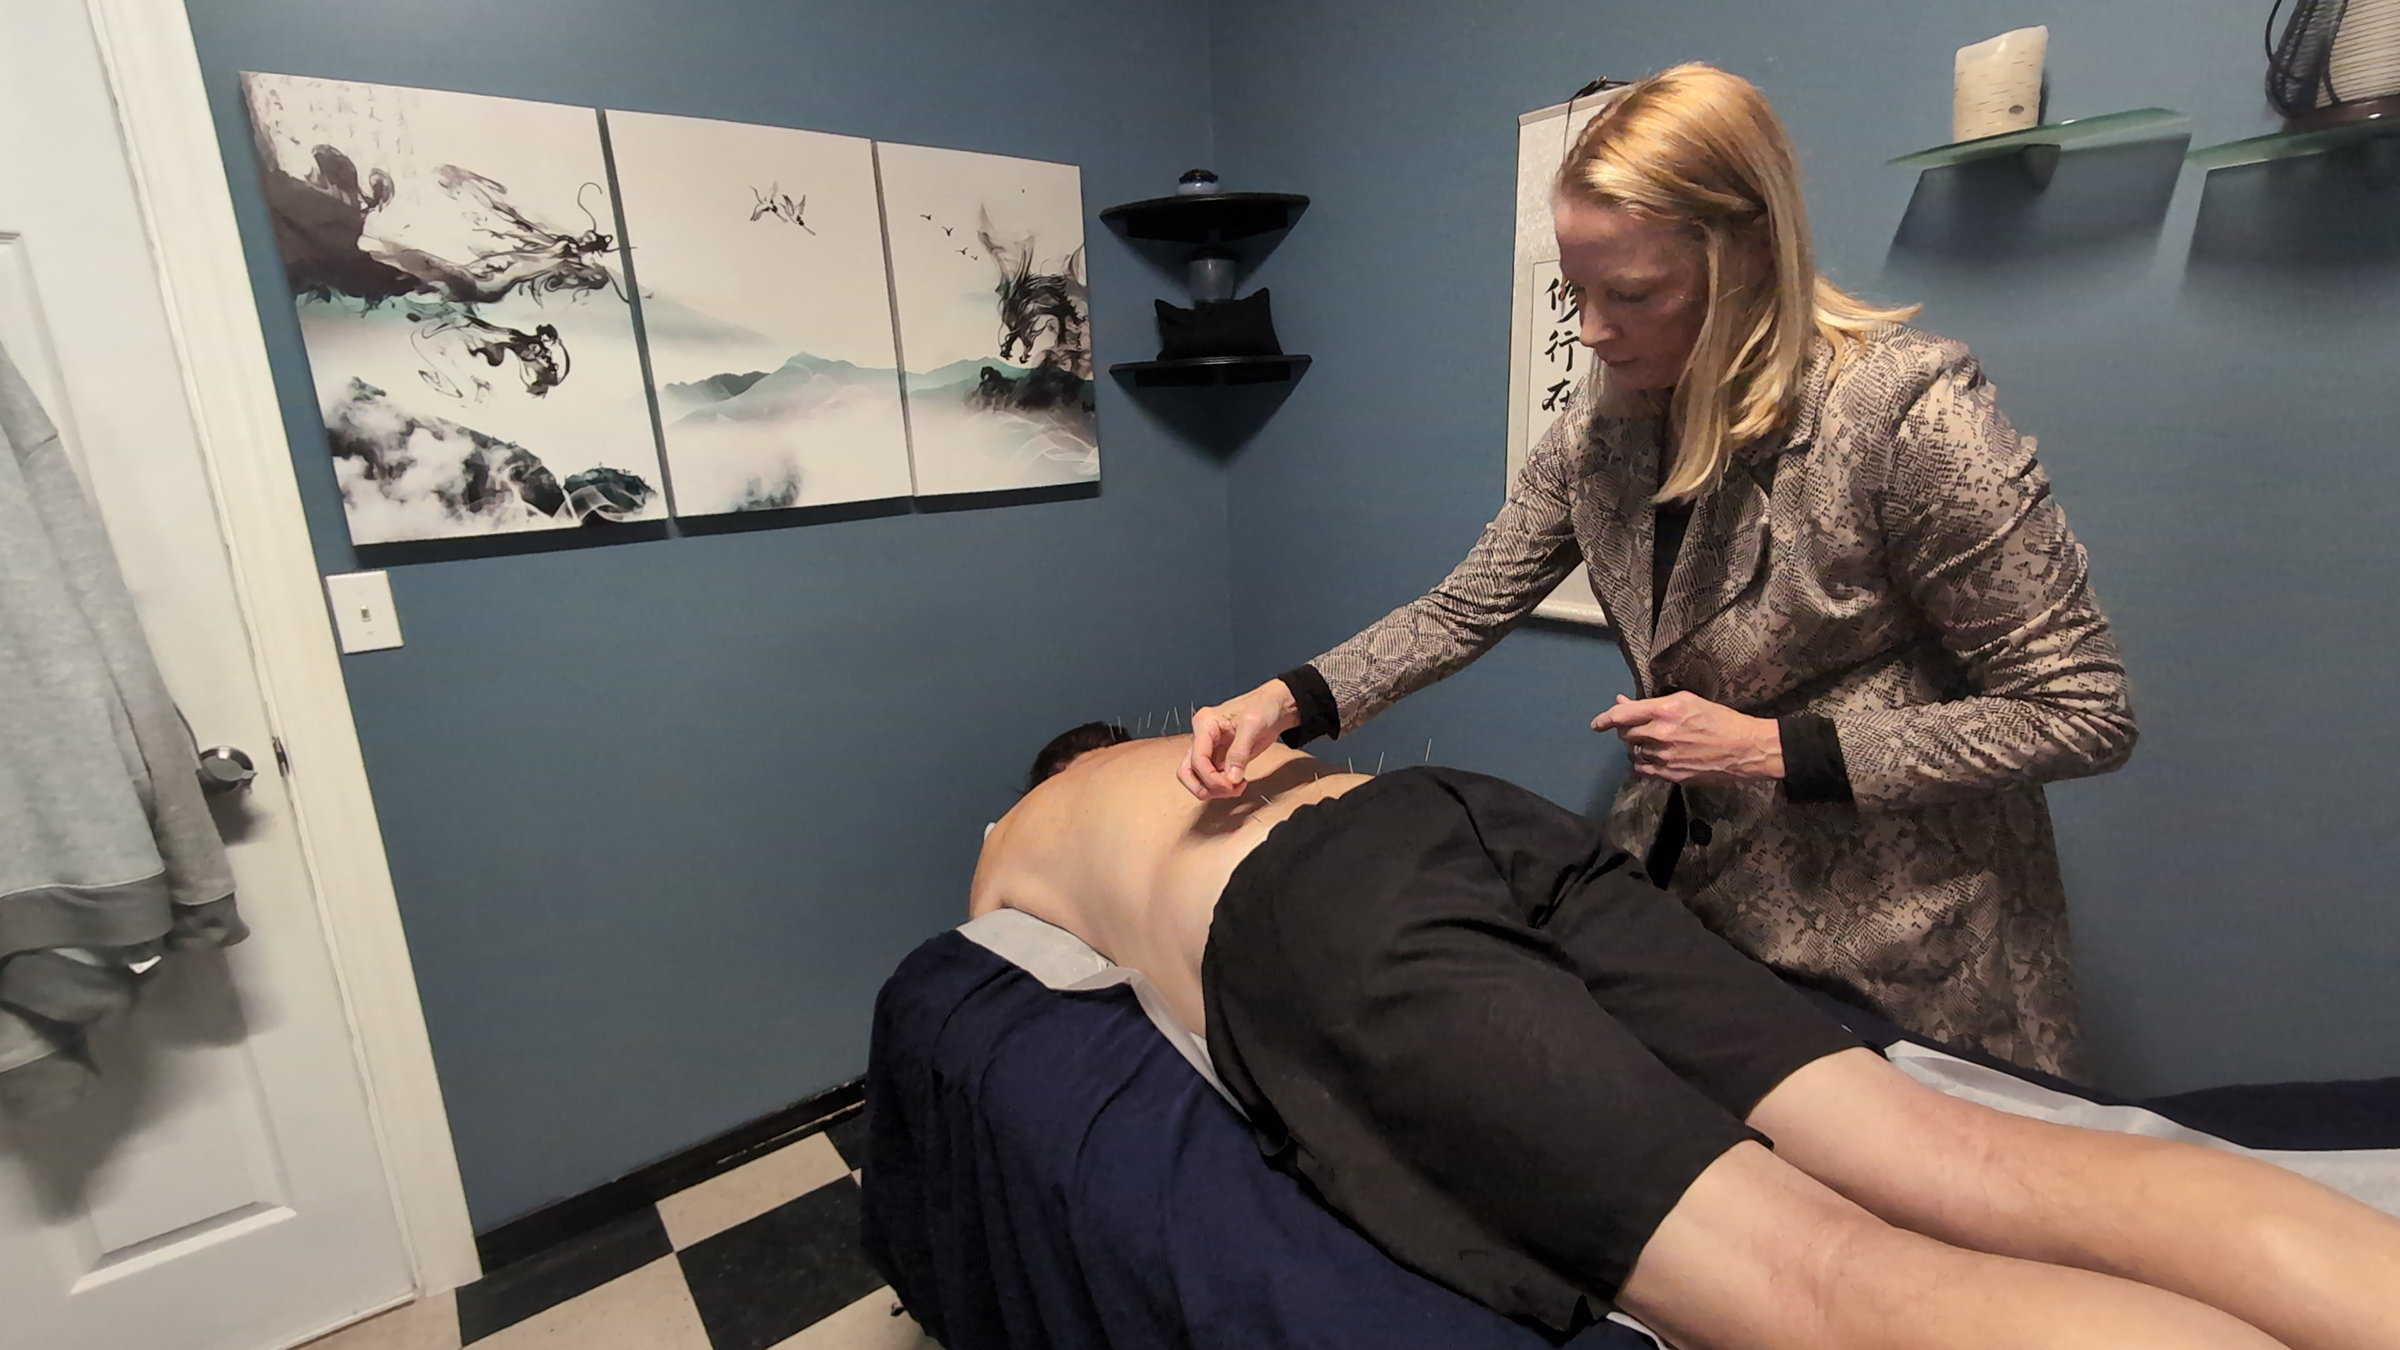 Acupuncturist Patty Kuchar, placing needles on the back of a male patient laying on the patient bed with his back skin exposed wearing black shorts.